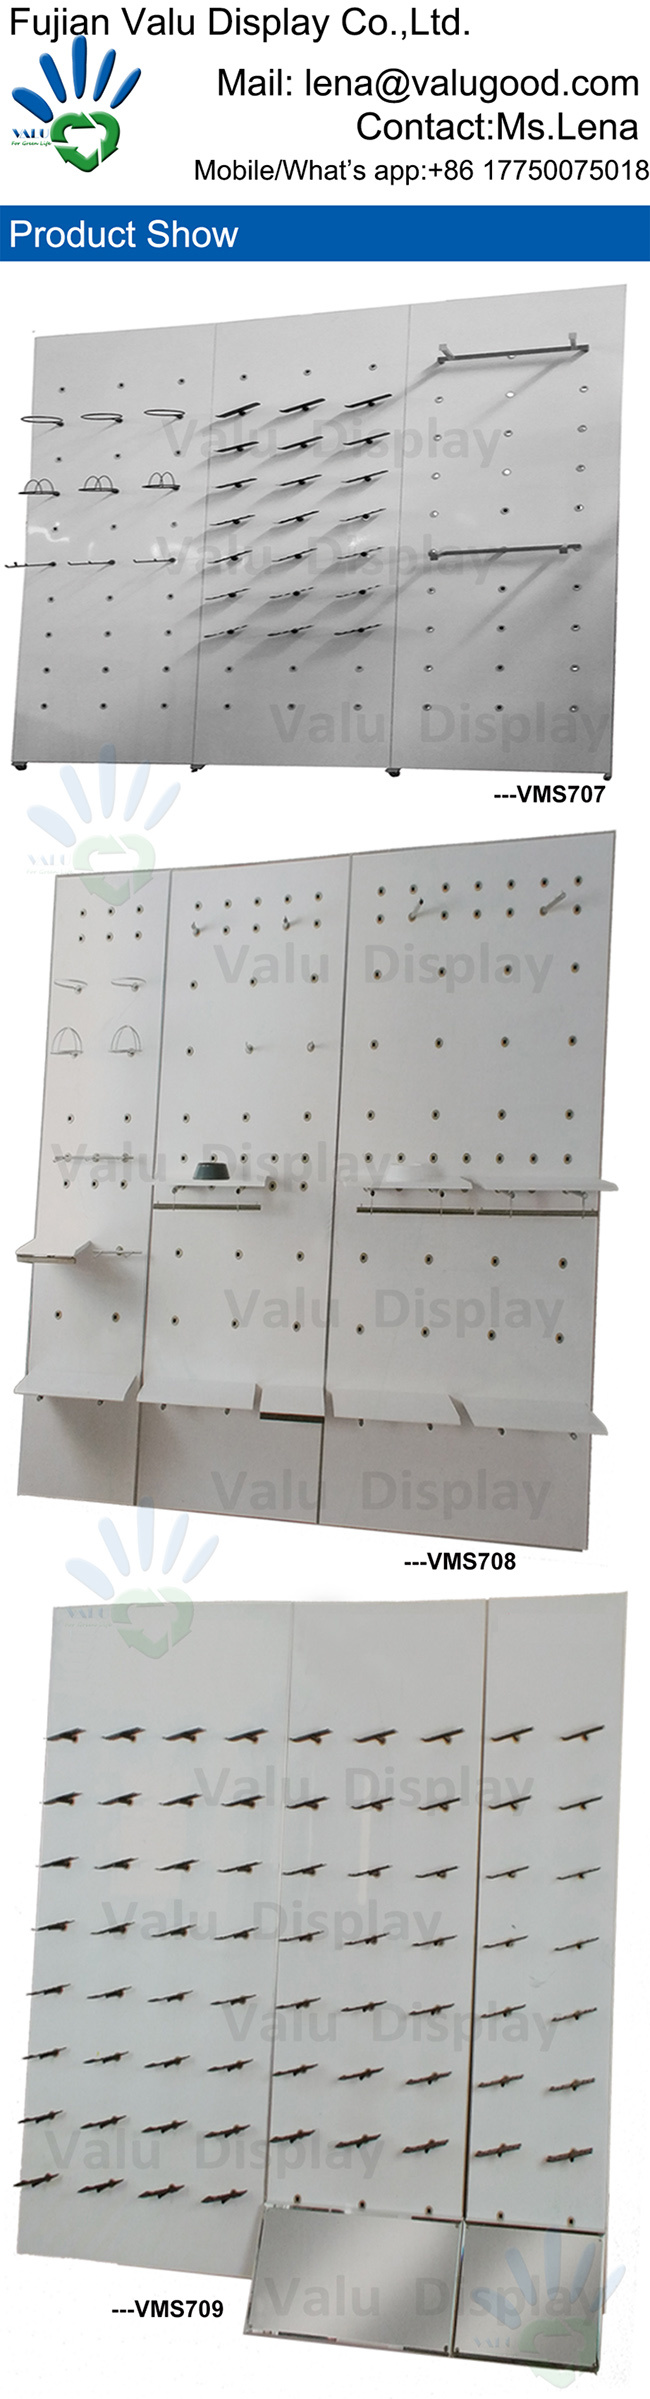 MDF and Iron Shoes Display Wall Panel Store Equipment /Fixture for Sports Shoes Store